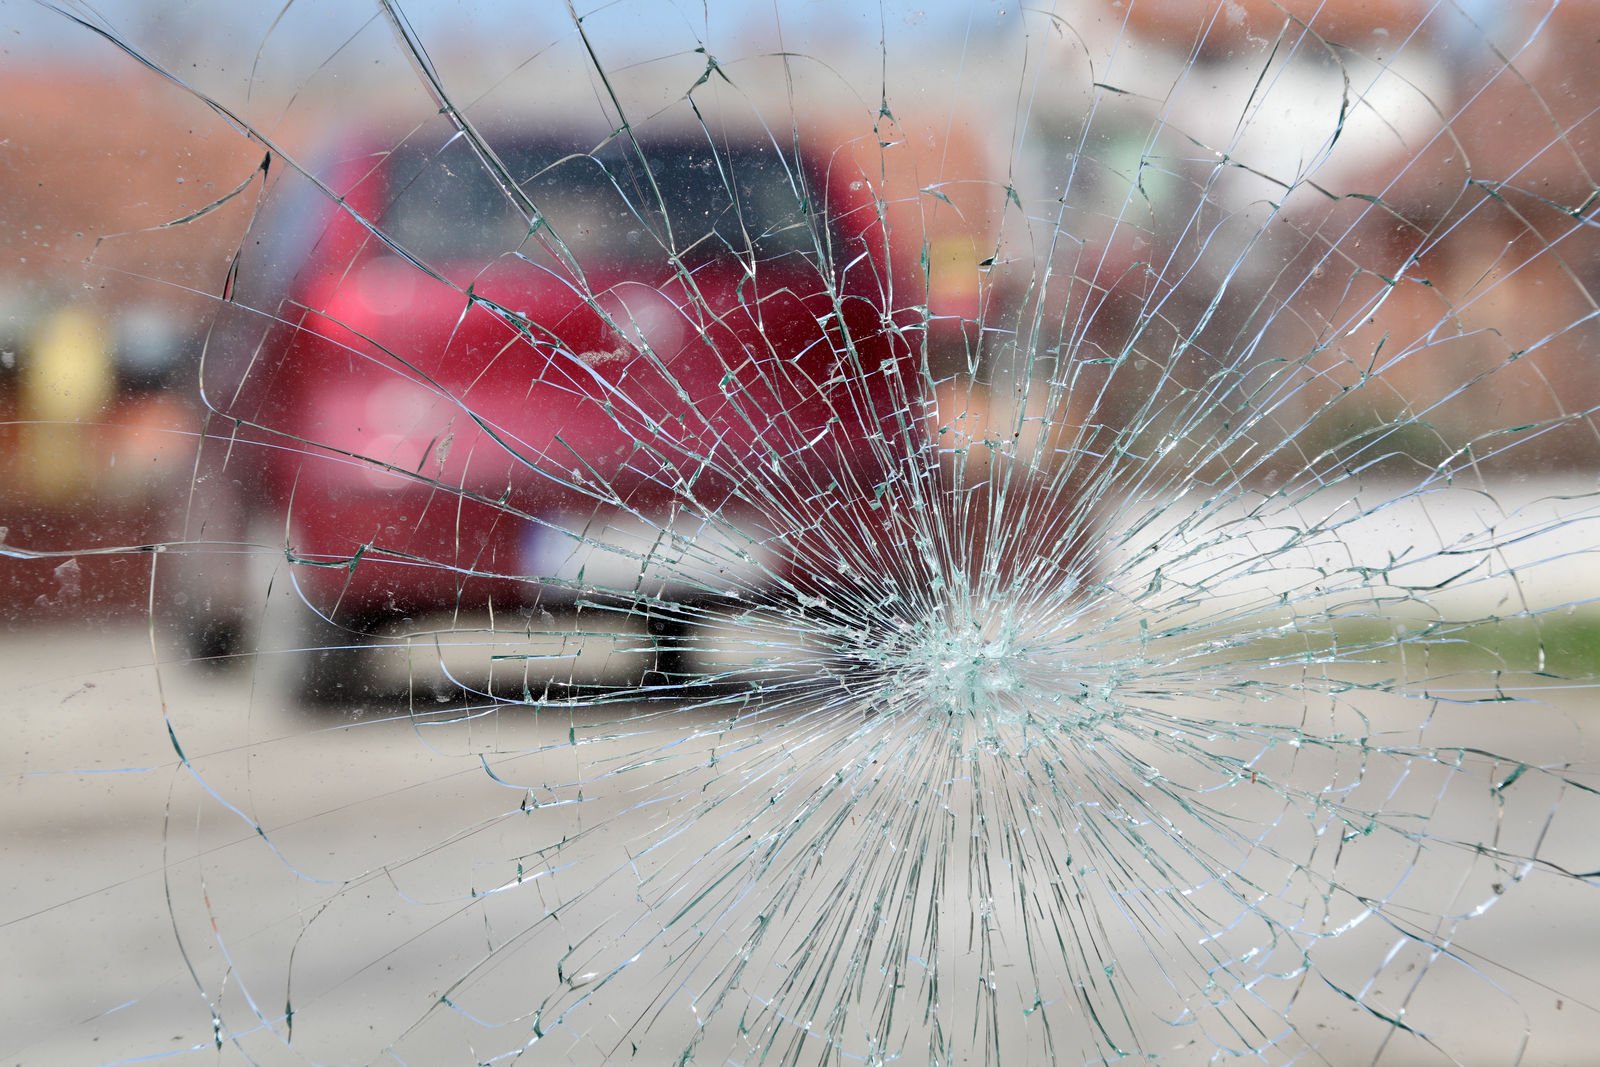 Does car insurance cover rock damage?